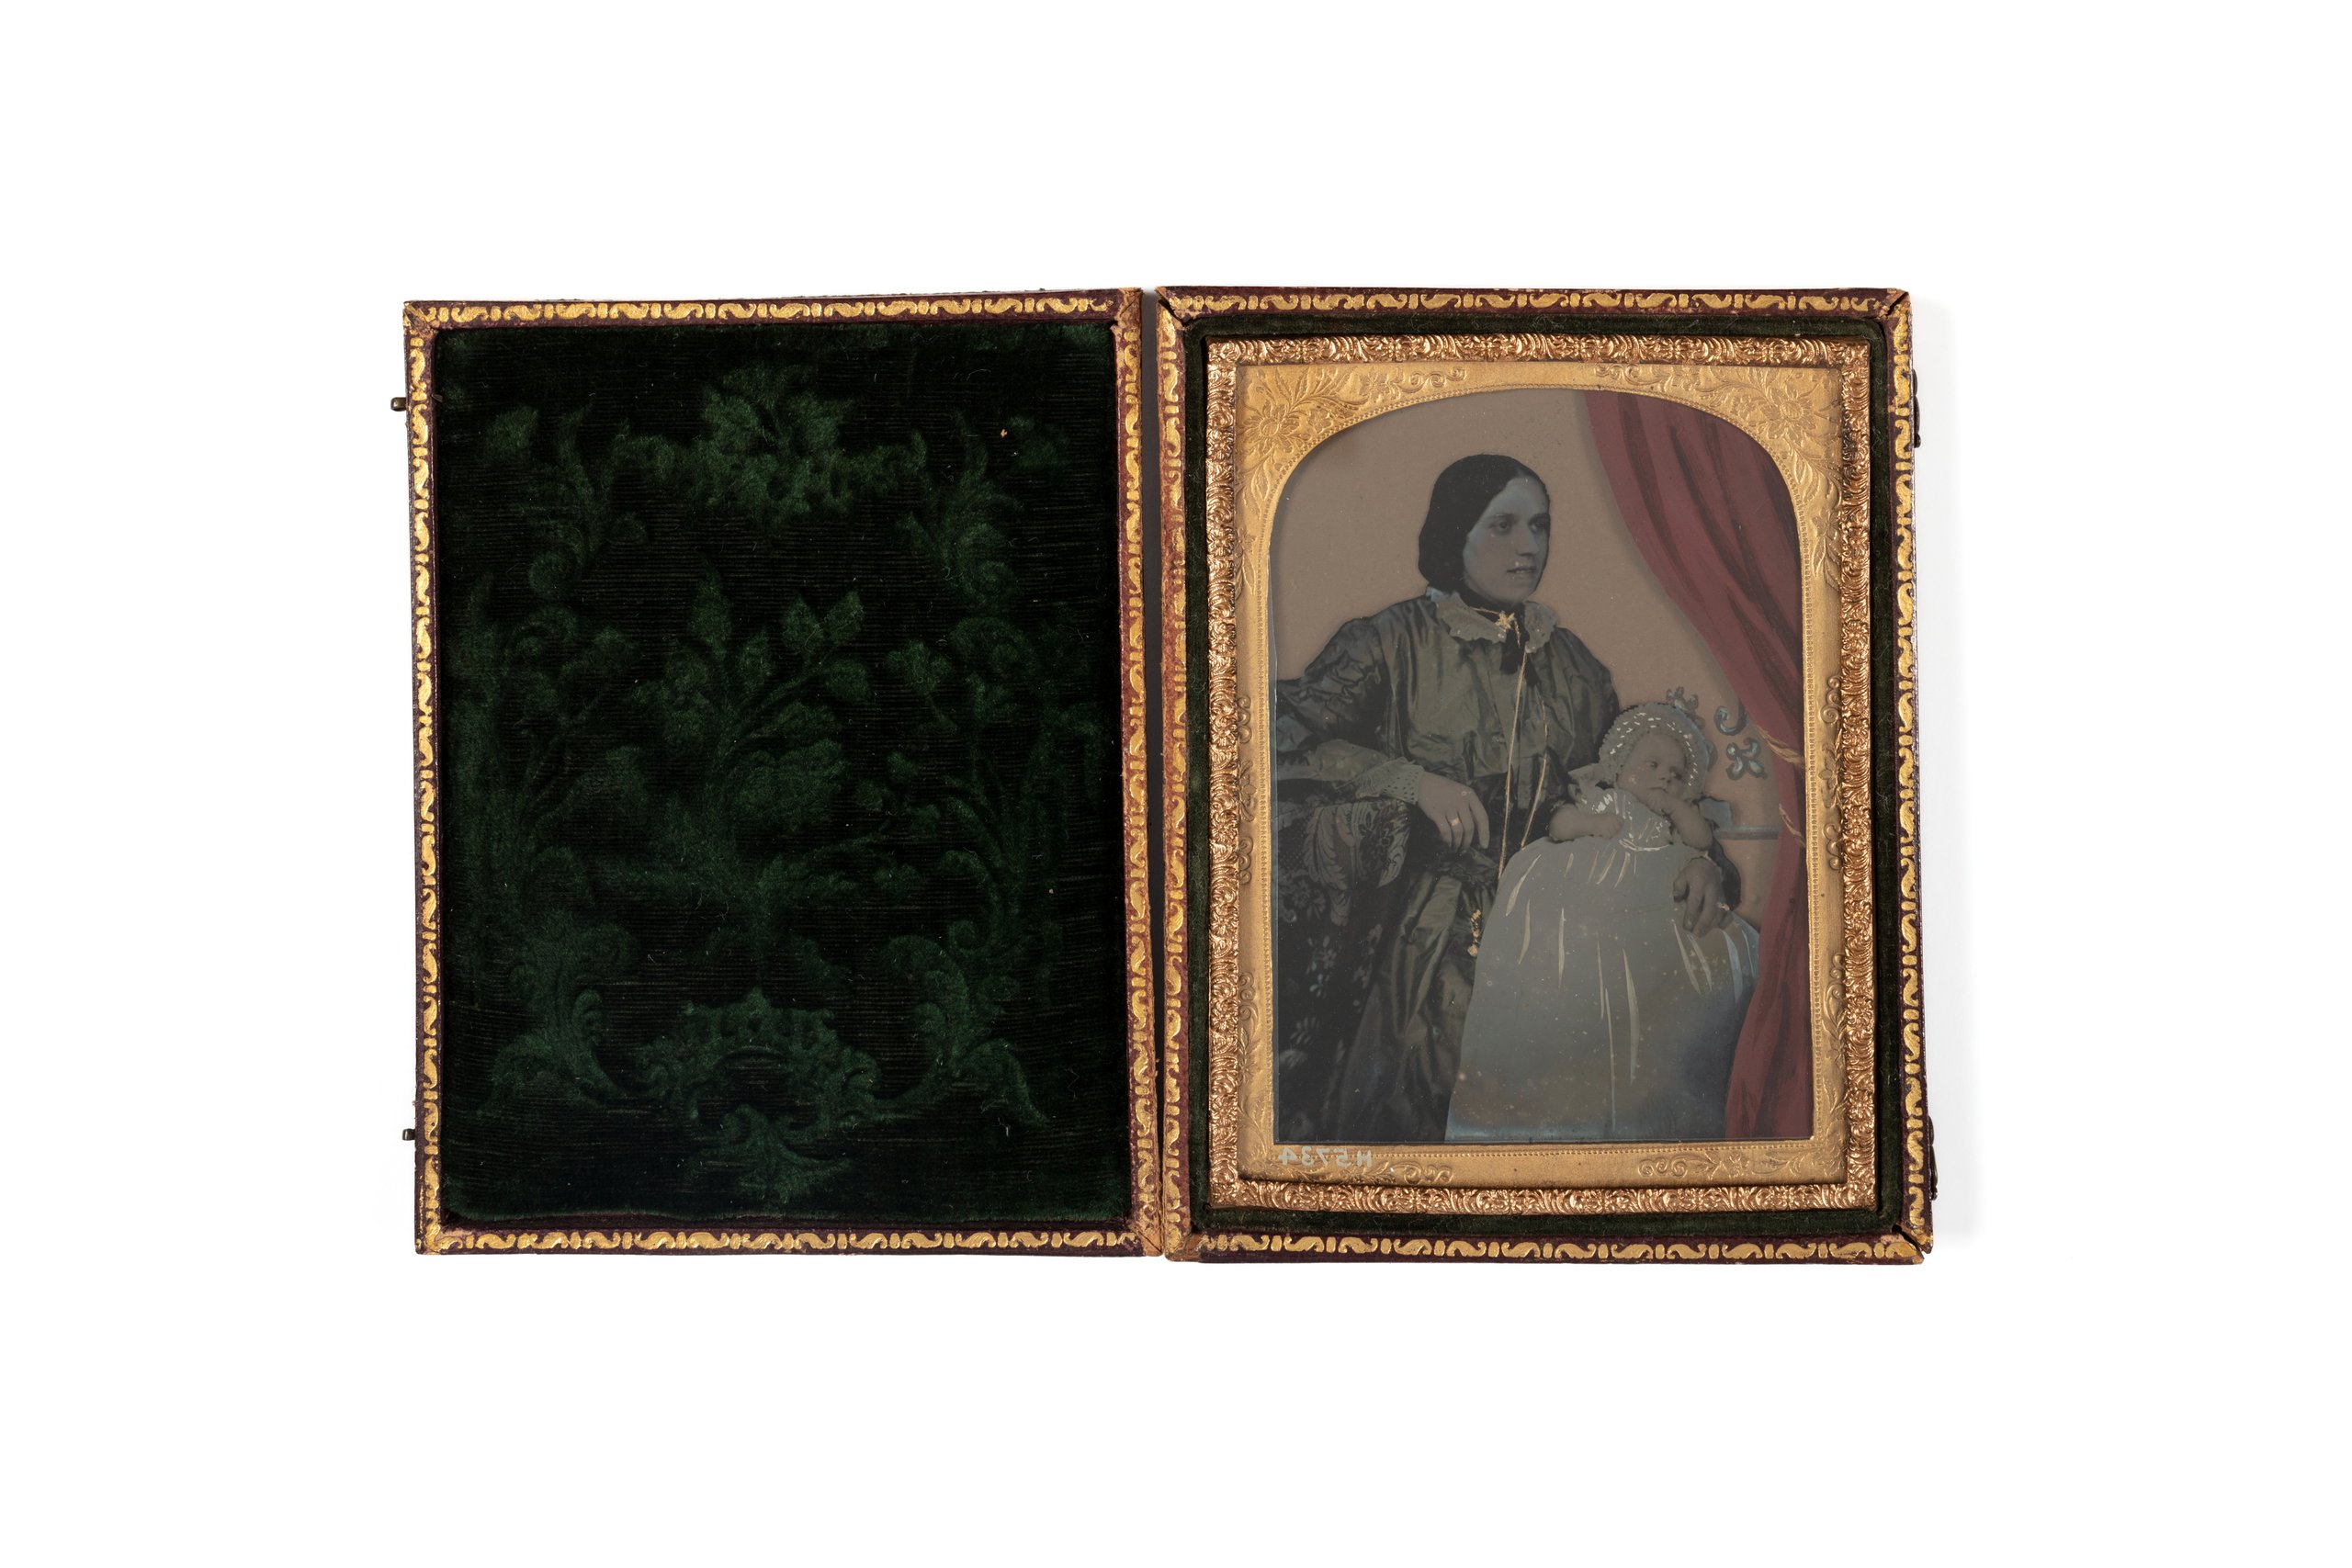 Ambrotype of a woman and baby